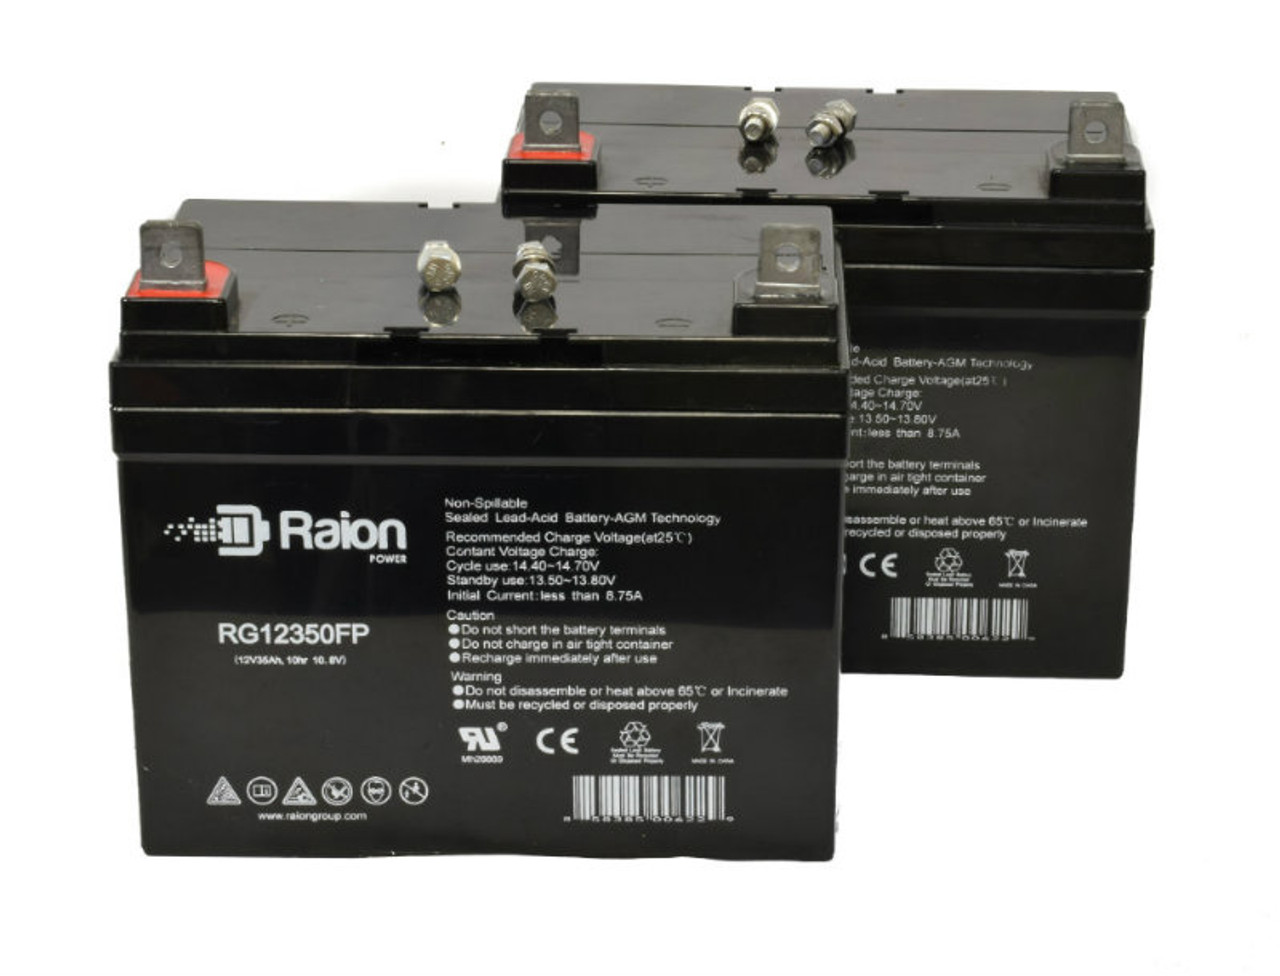 Raion Power Replacement 12V 35Ah Lawn Mower Battery for Agco Allis 1718H - 2 Pack